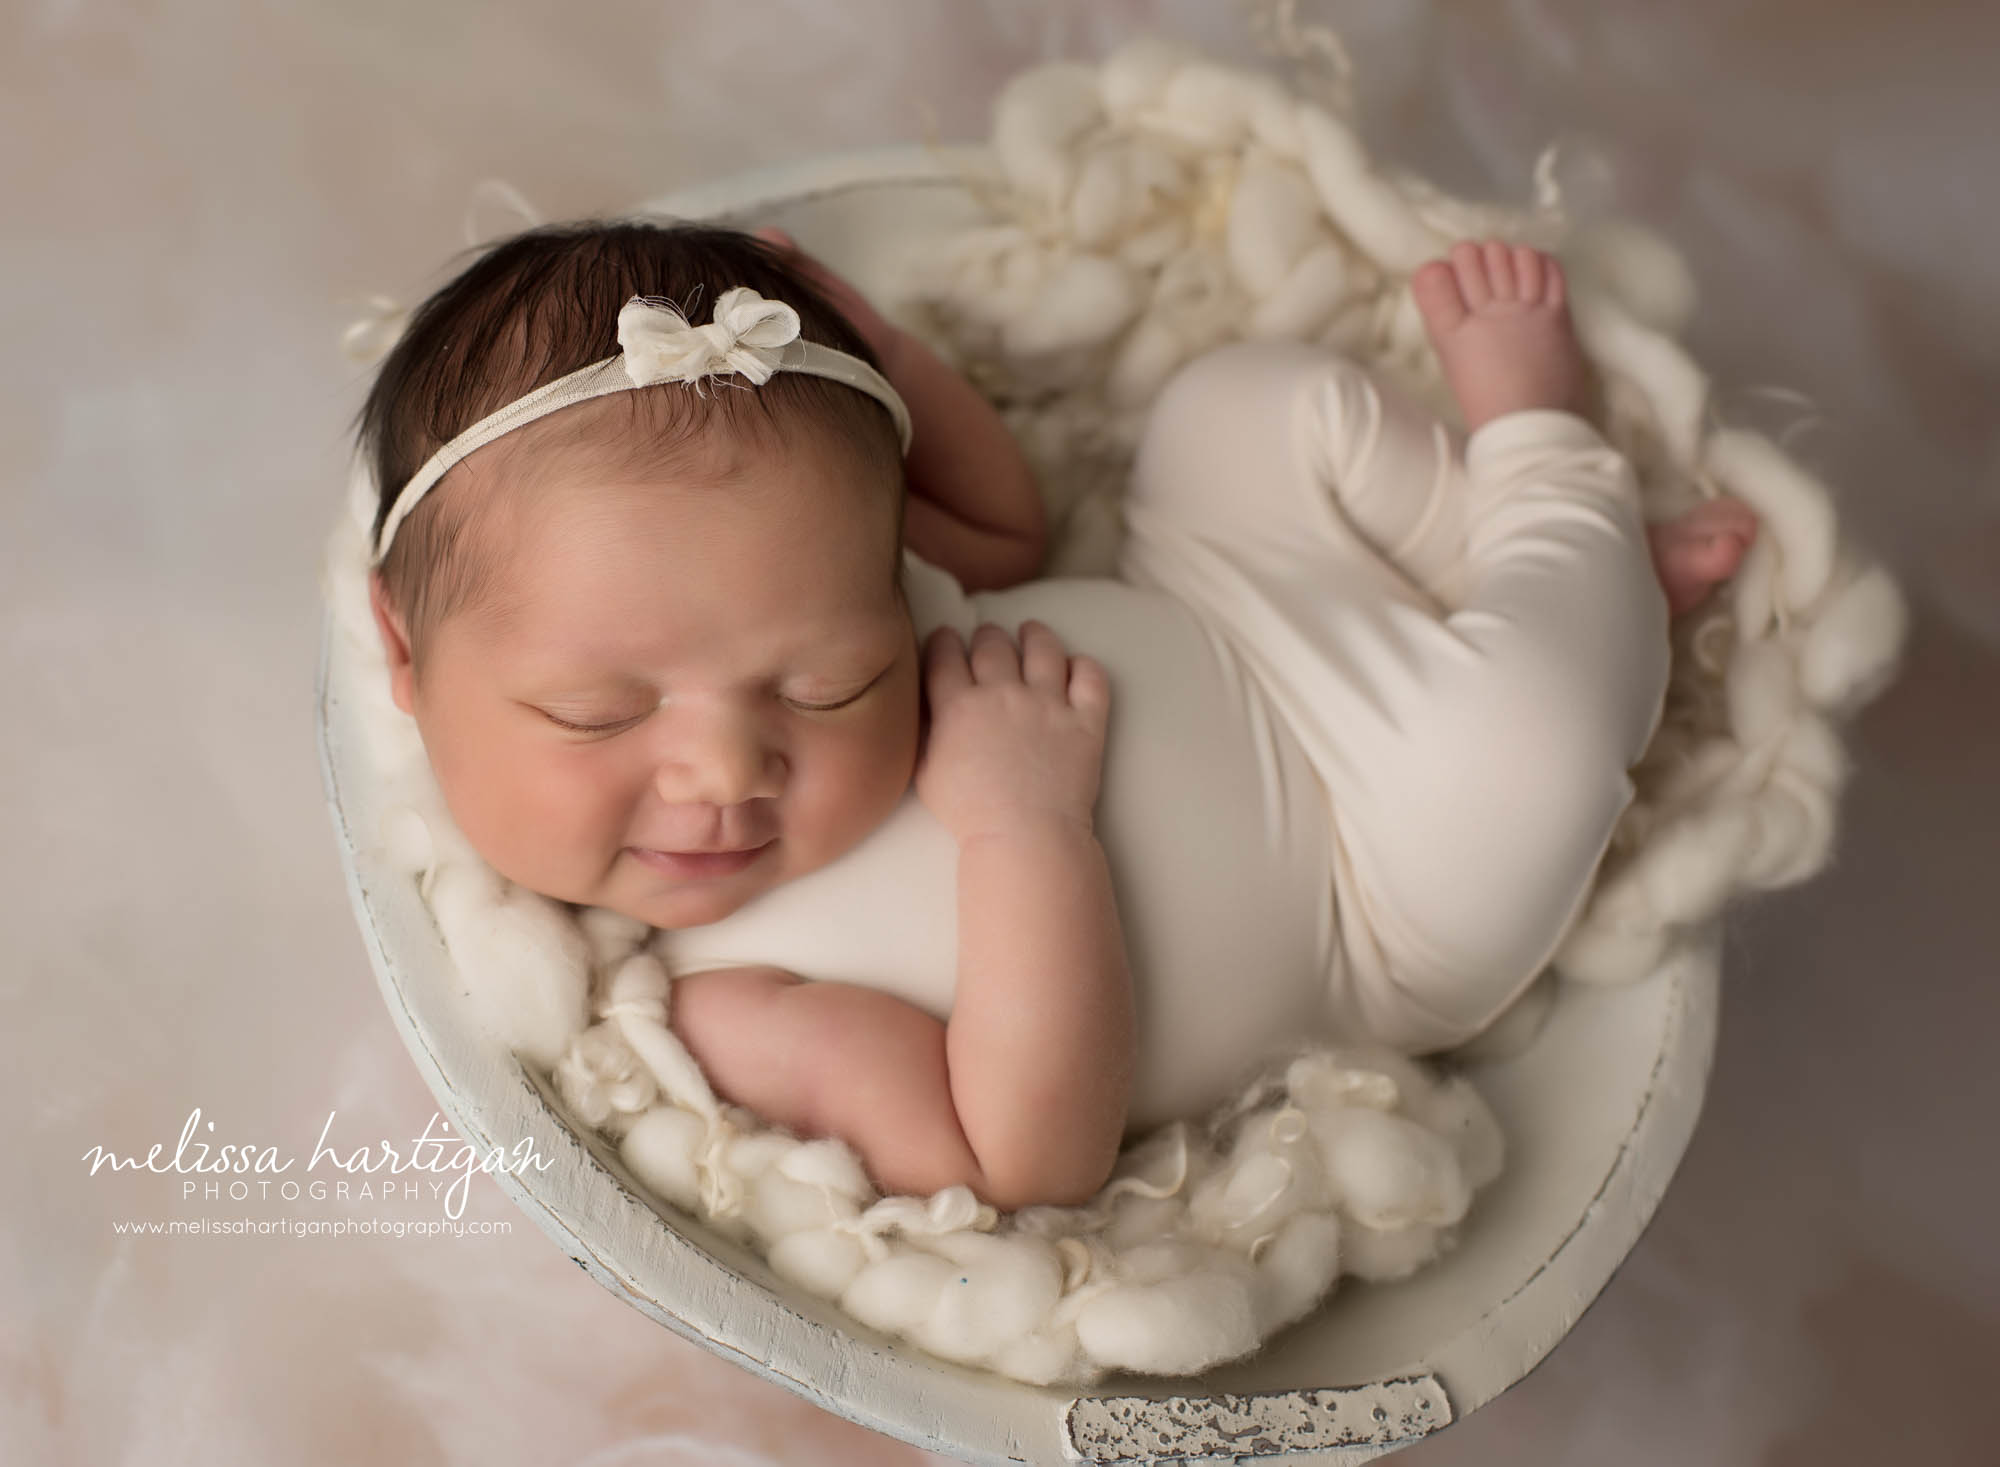 newborn baby girlk posed in wooden bowl wearing white newborn outfit and bow headband south windsor ct newborn photography